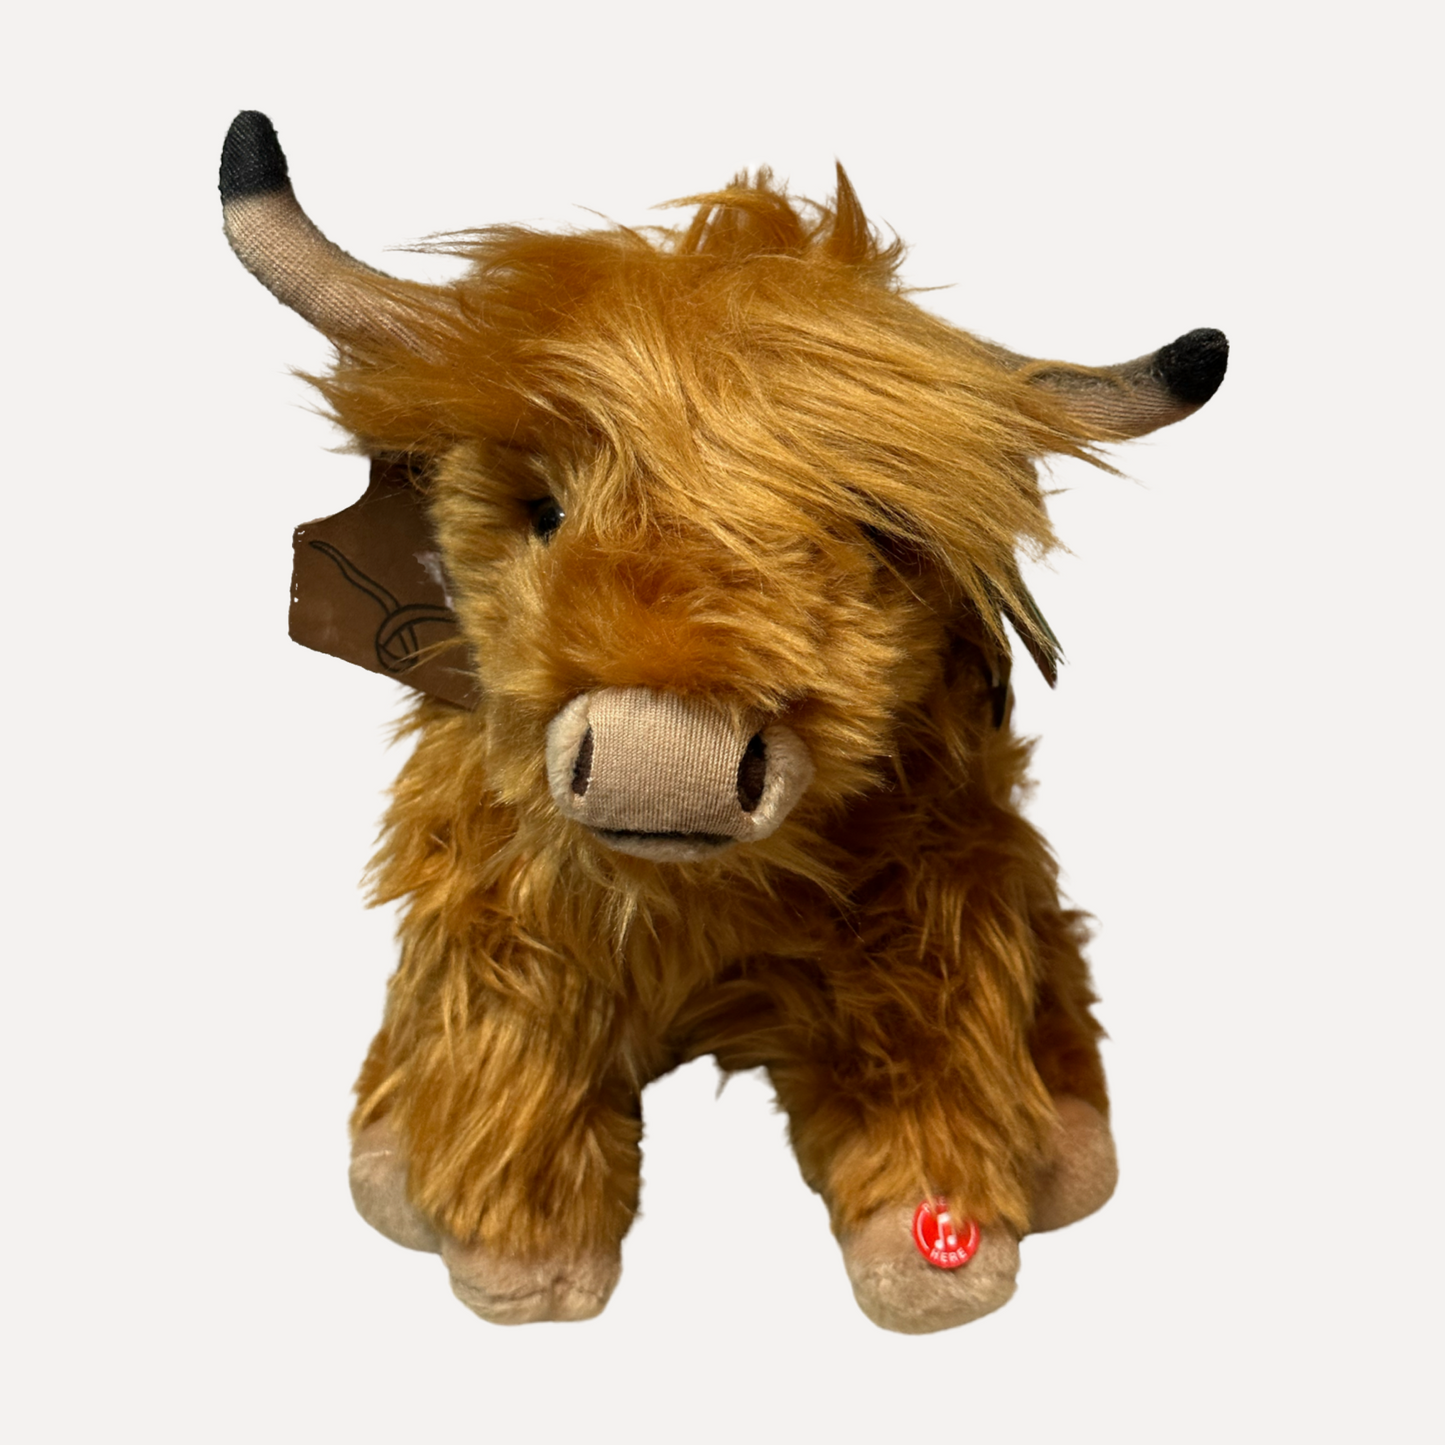 Highland COO SUPPORT BOX